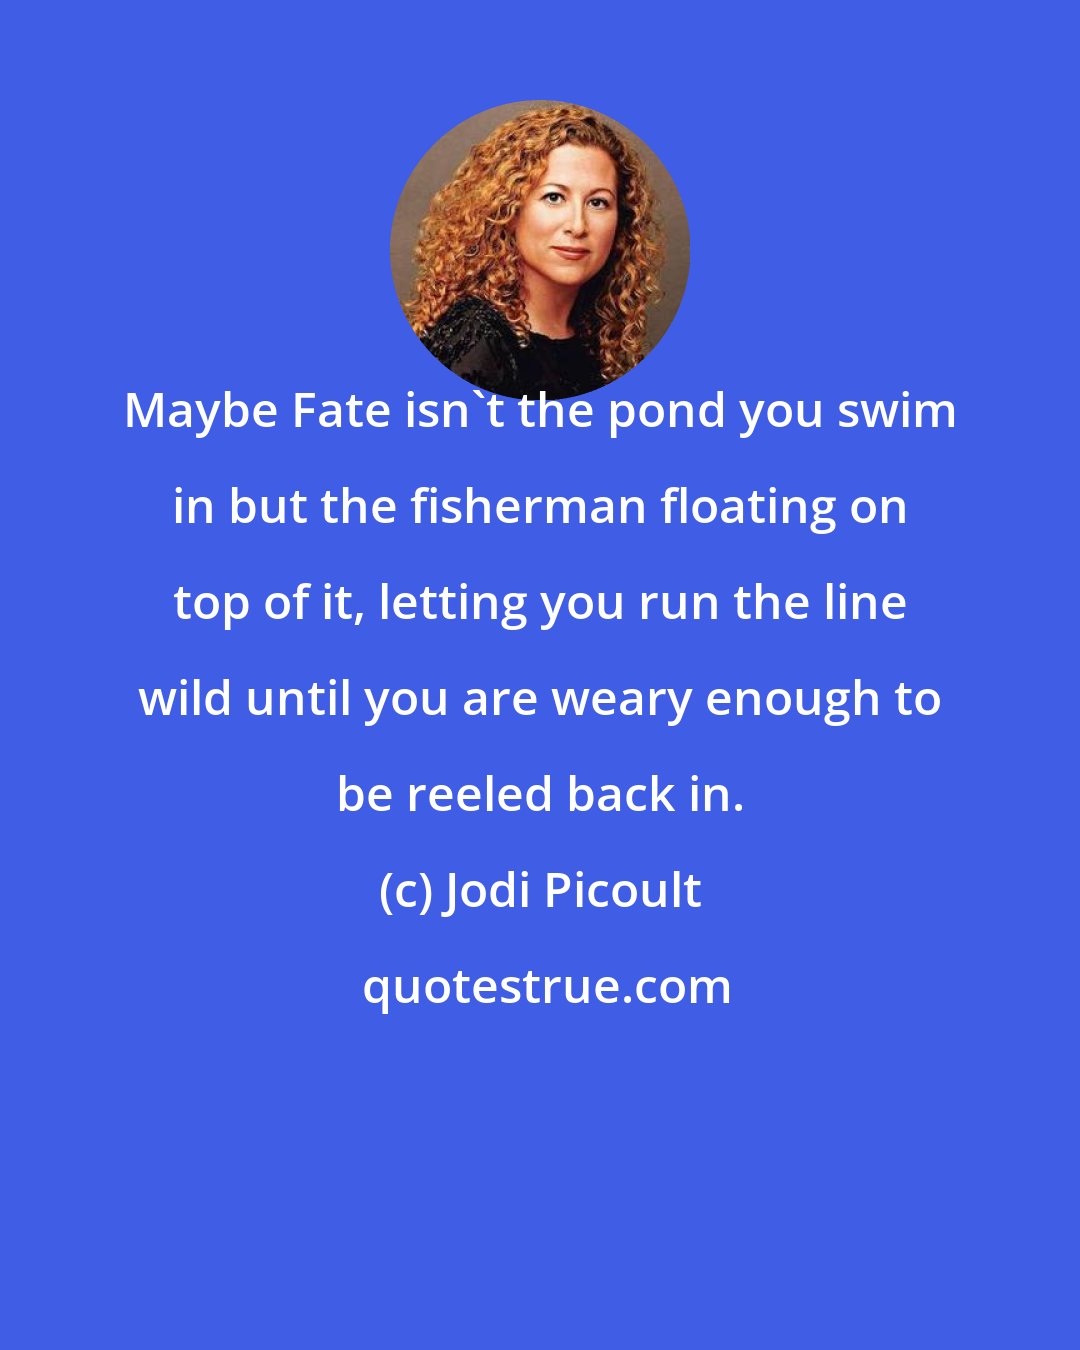 Jodi Picoult: Maybe Fate isn't the pond you swim in but the fisherman floating on top of it, letting you run the line wild until you are weary enough to be reeled back in.